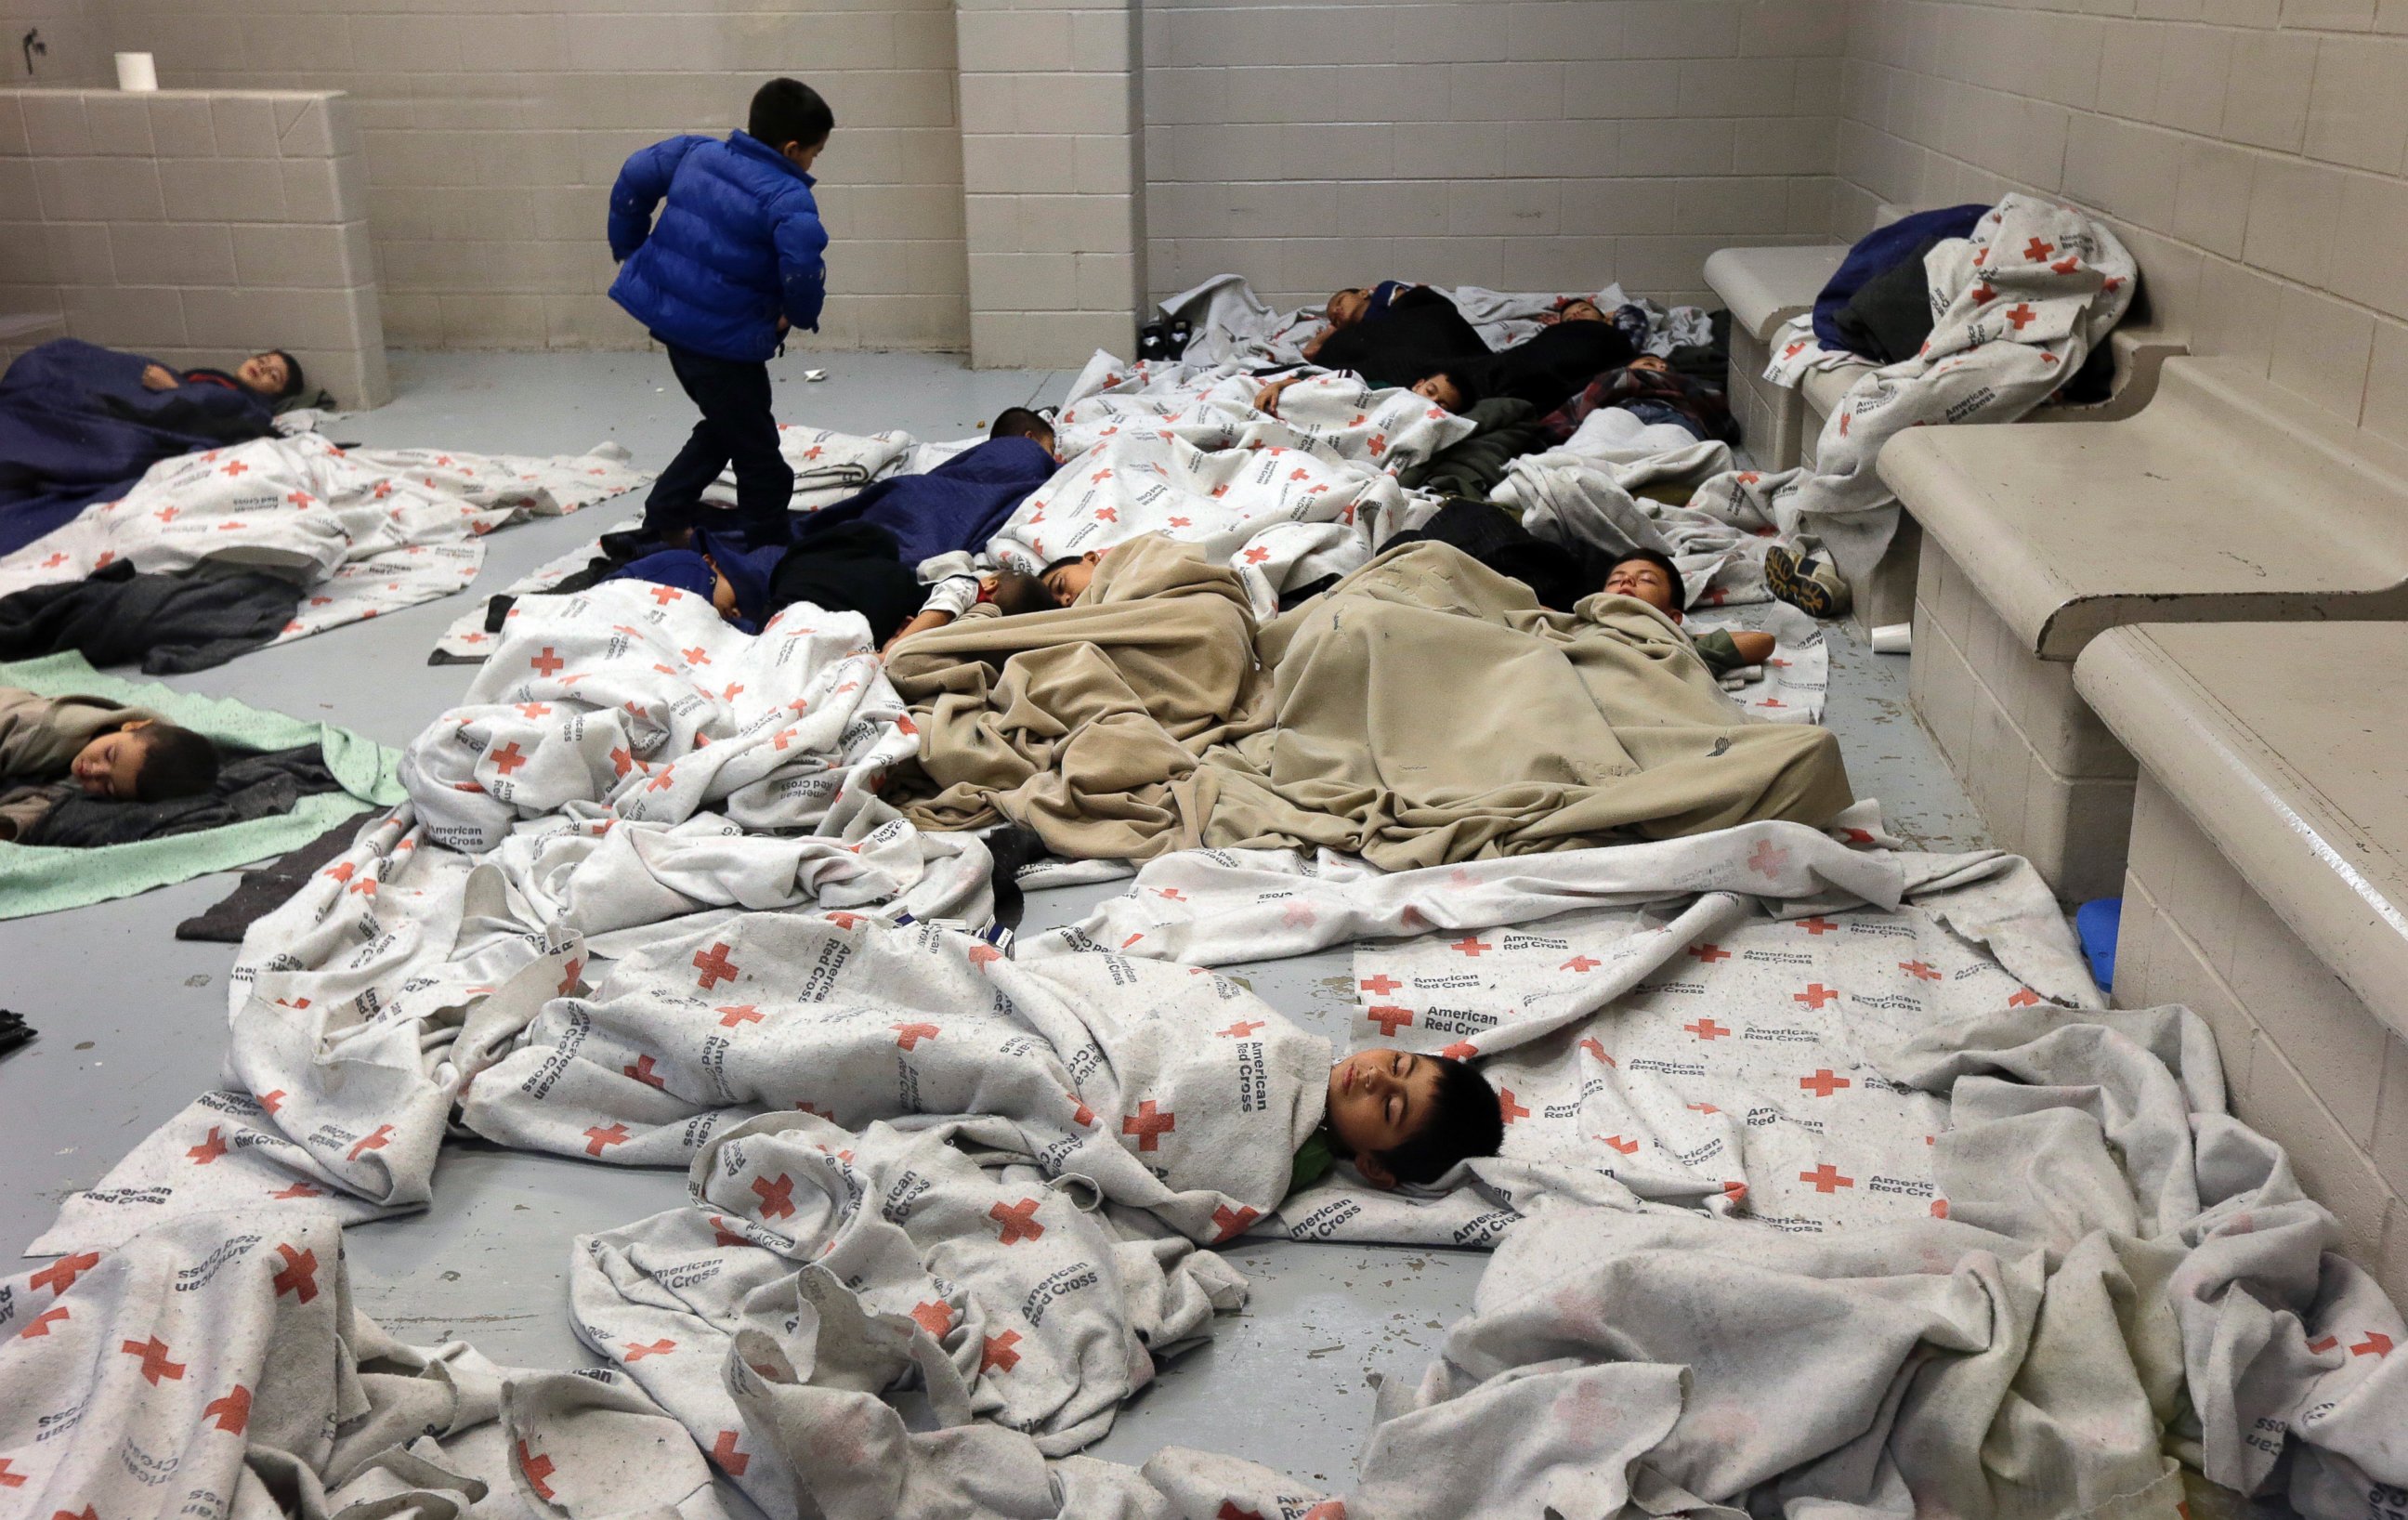 PHOTO: Detainees sleep in a holding cell at a U.S. Customs and Border Protection processing facility, on June 18, 2014, in Brownsville, Texas.